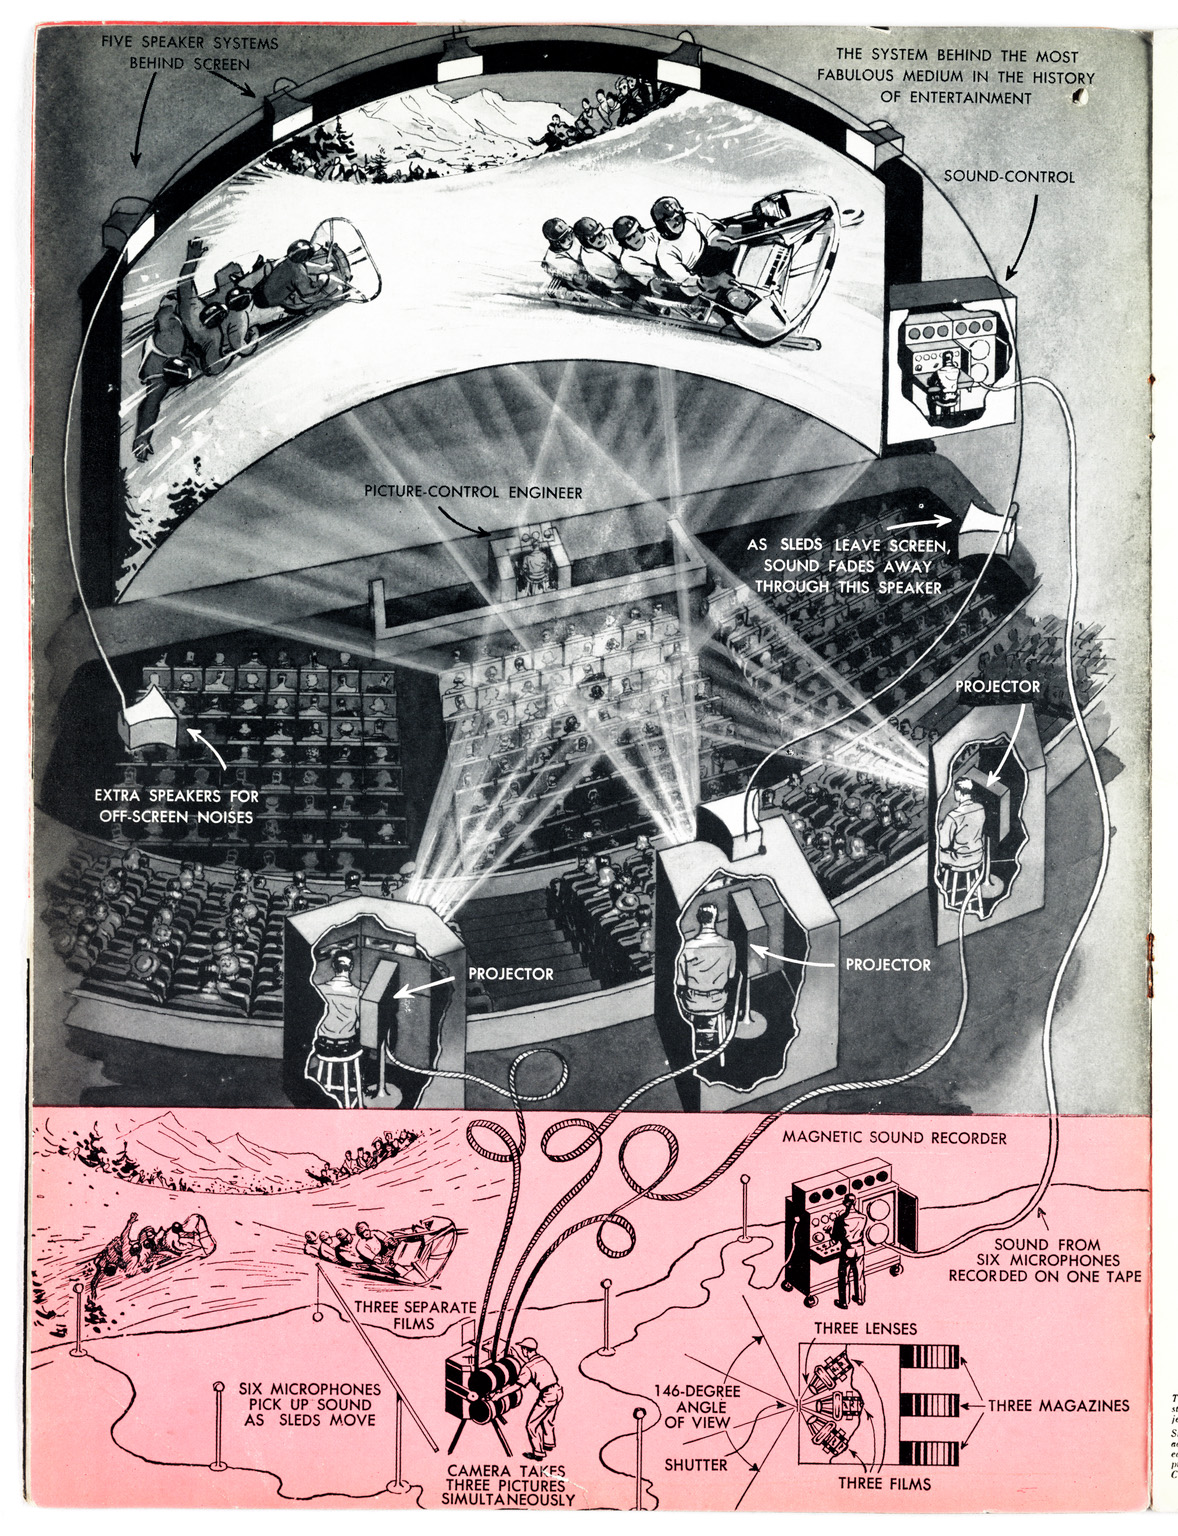 Schematic drawing showing various stages in the production of a Cinerama film